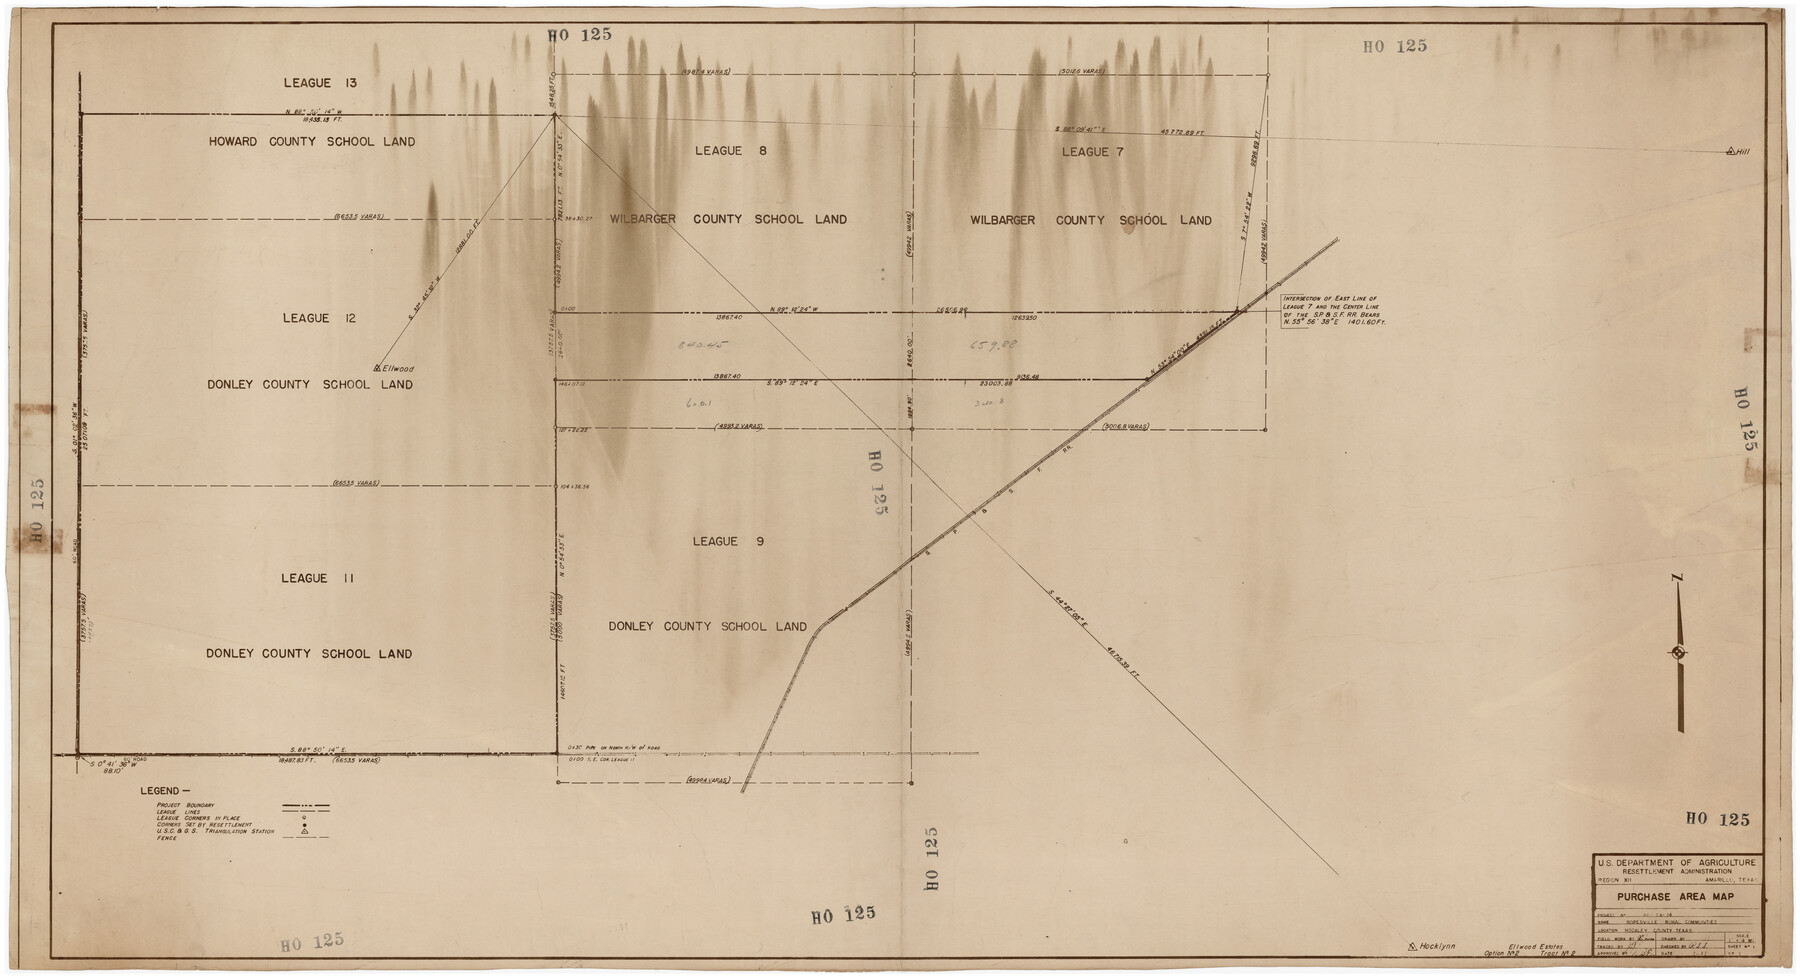 89681, Purchase Area Map, Ropesville Rural Communities, Hockley County, Texas, Twichell Survey Records